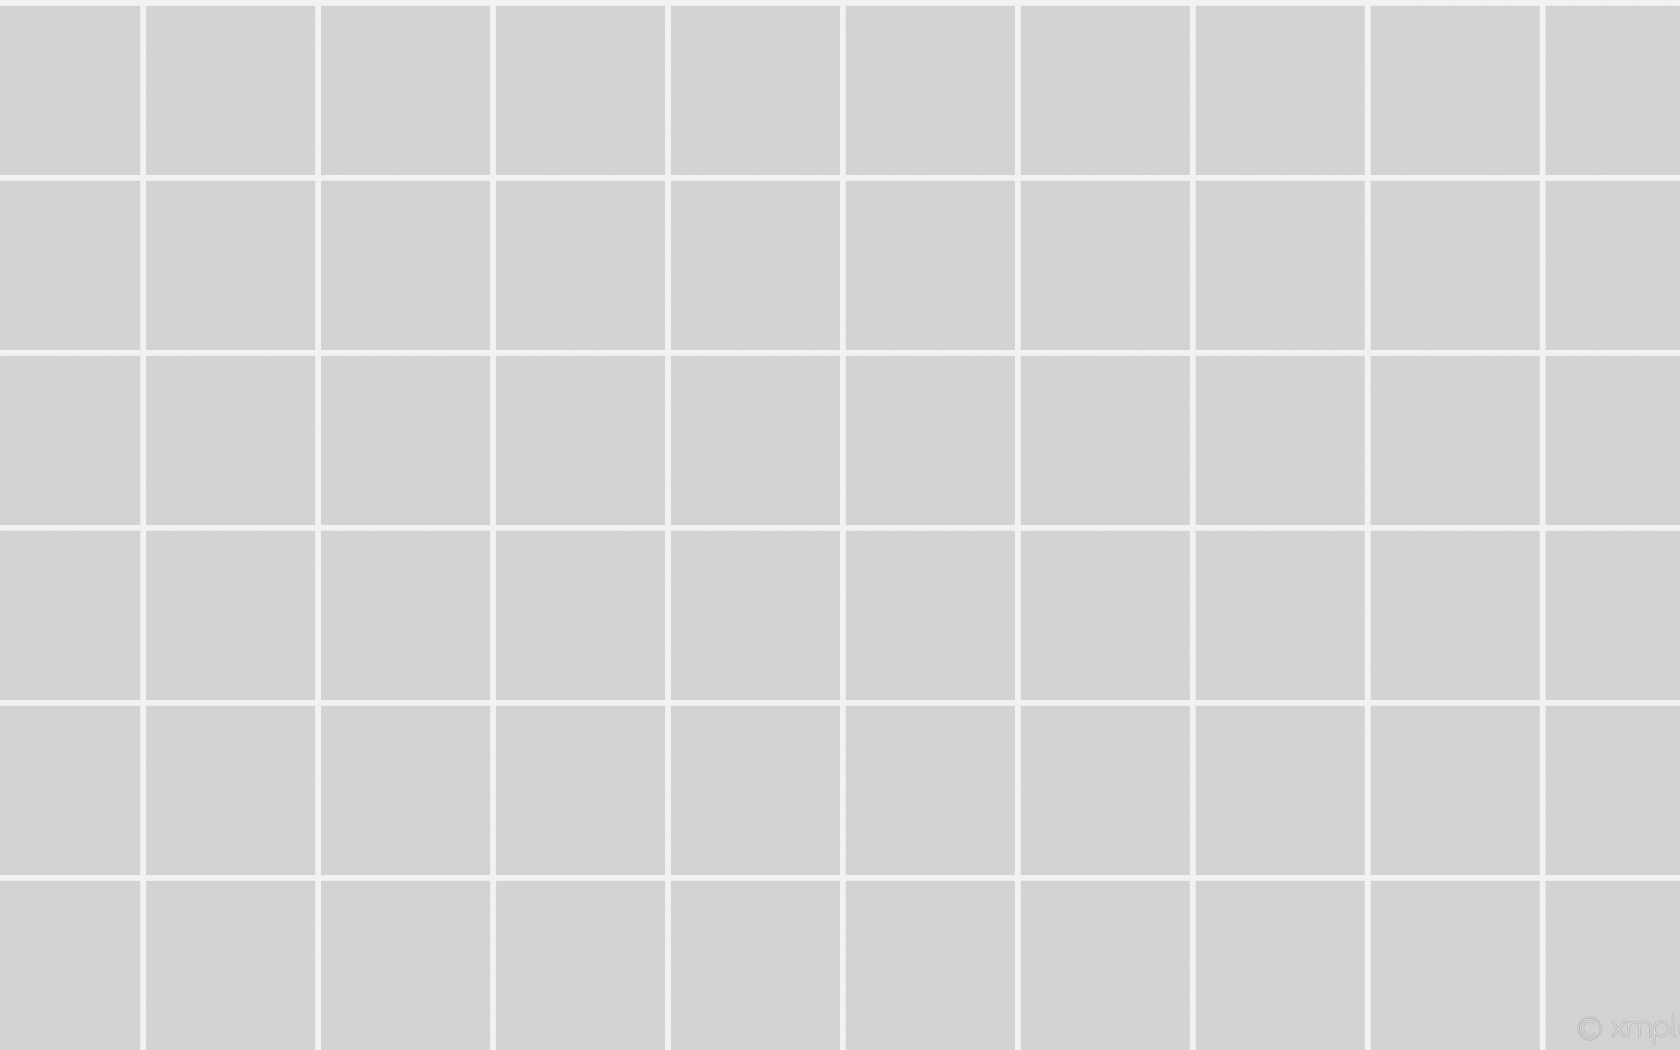 An image of a grey tiled background - Grid